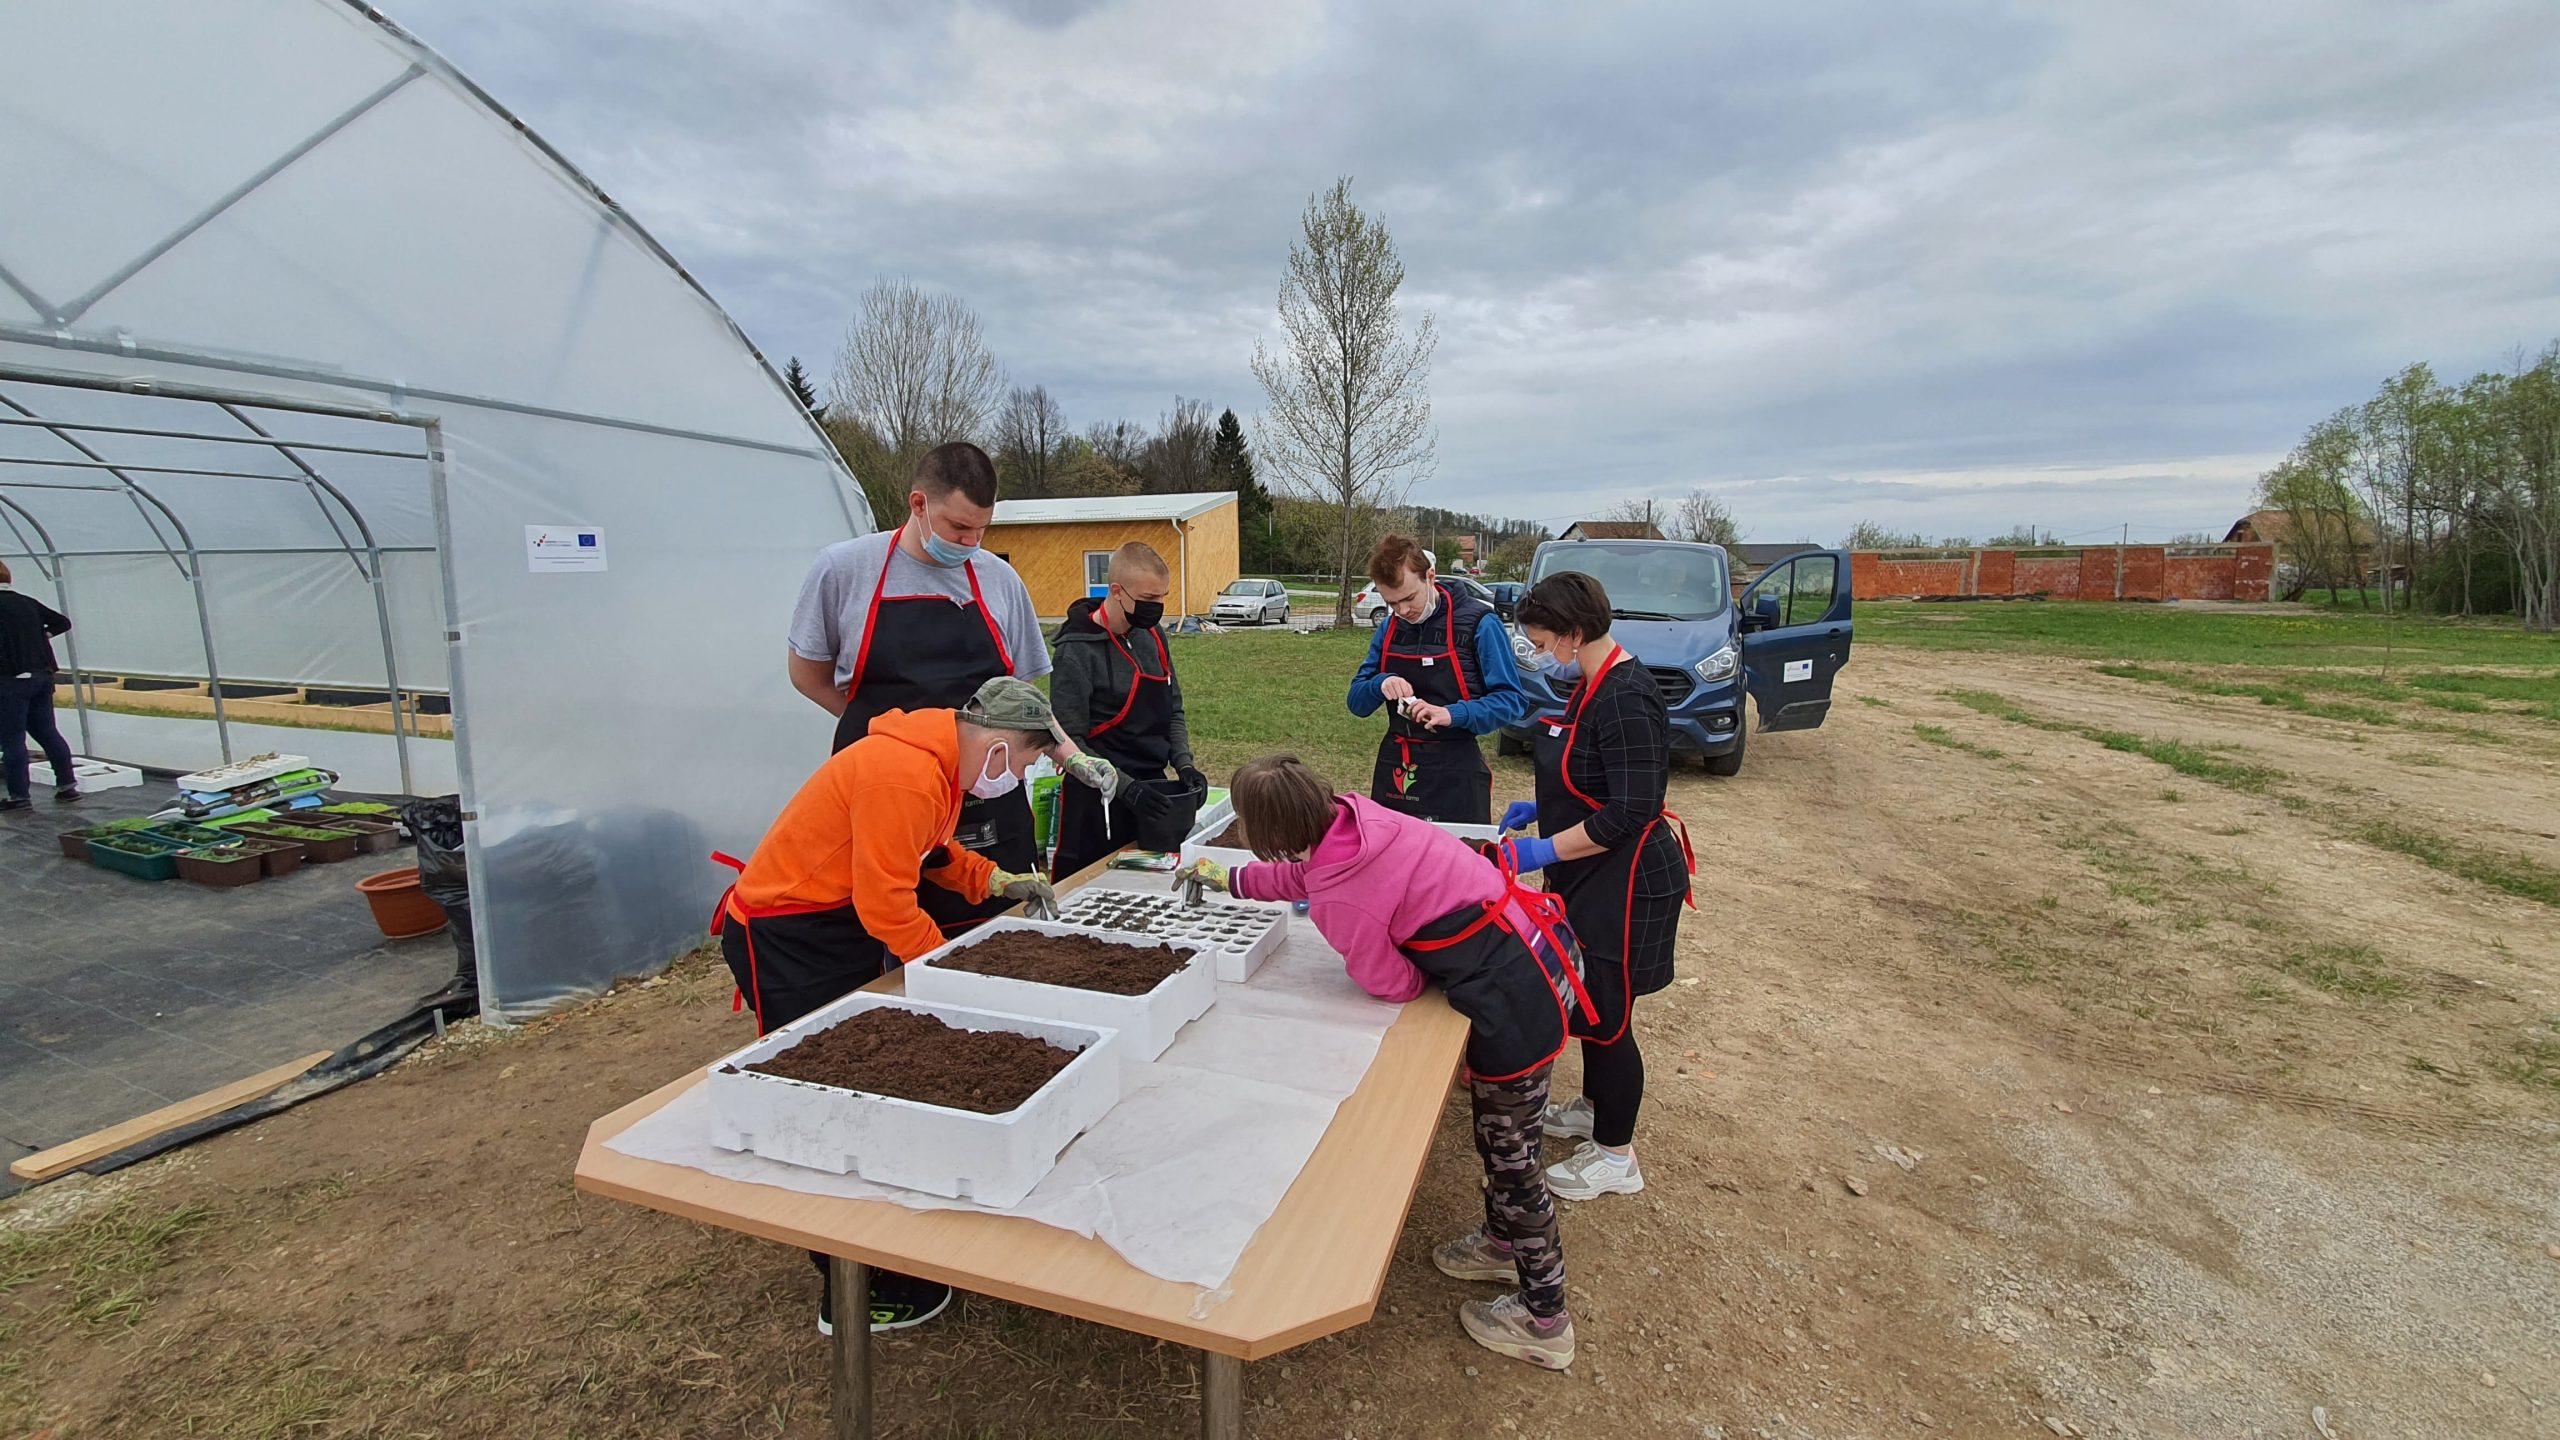 CROZ and the Association of Persons with Disabilities of the Sisak-Moslavina County have partnered to bring the Inclusive Farm to life